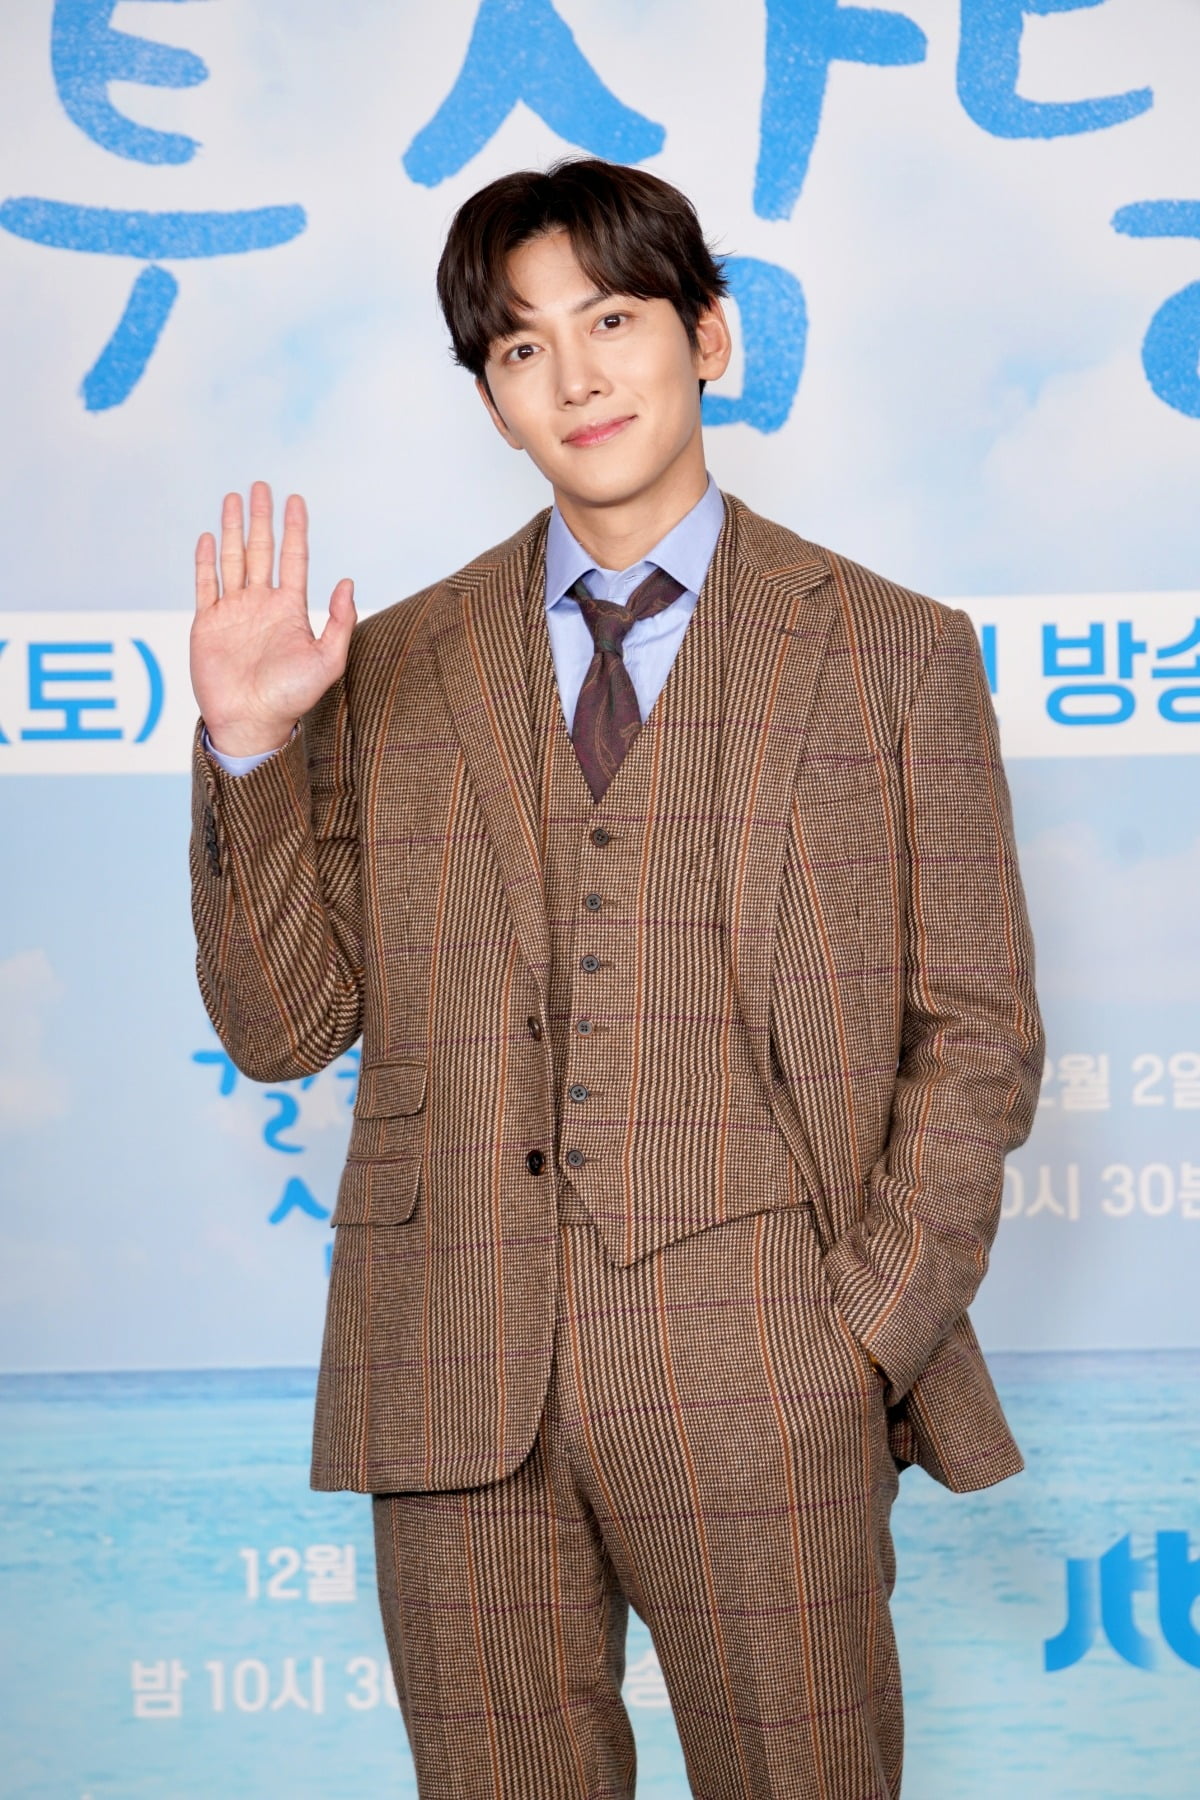 Ji Chang-wook "Am I the king of romantic comedies? I'm embarrassed and embarrassed."